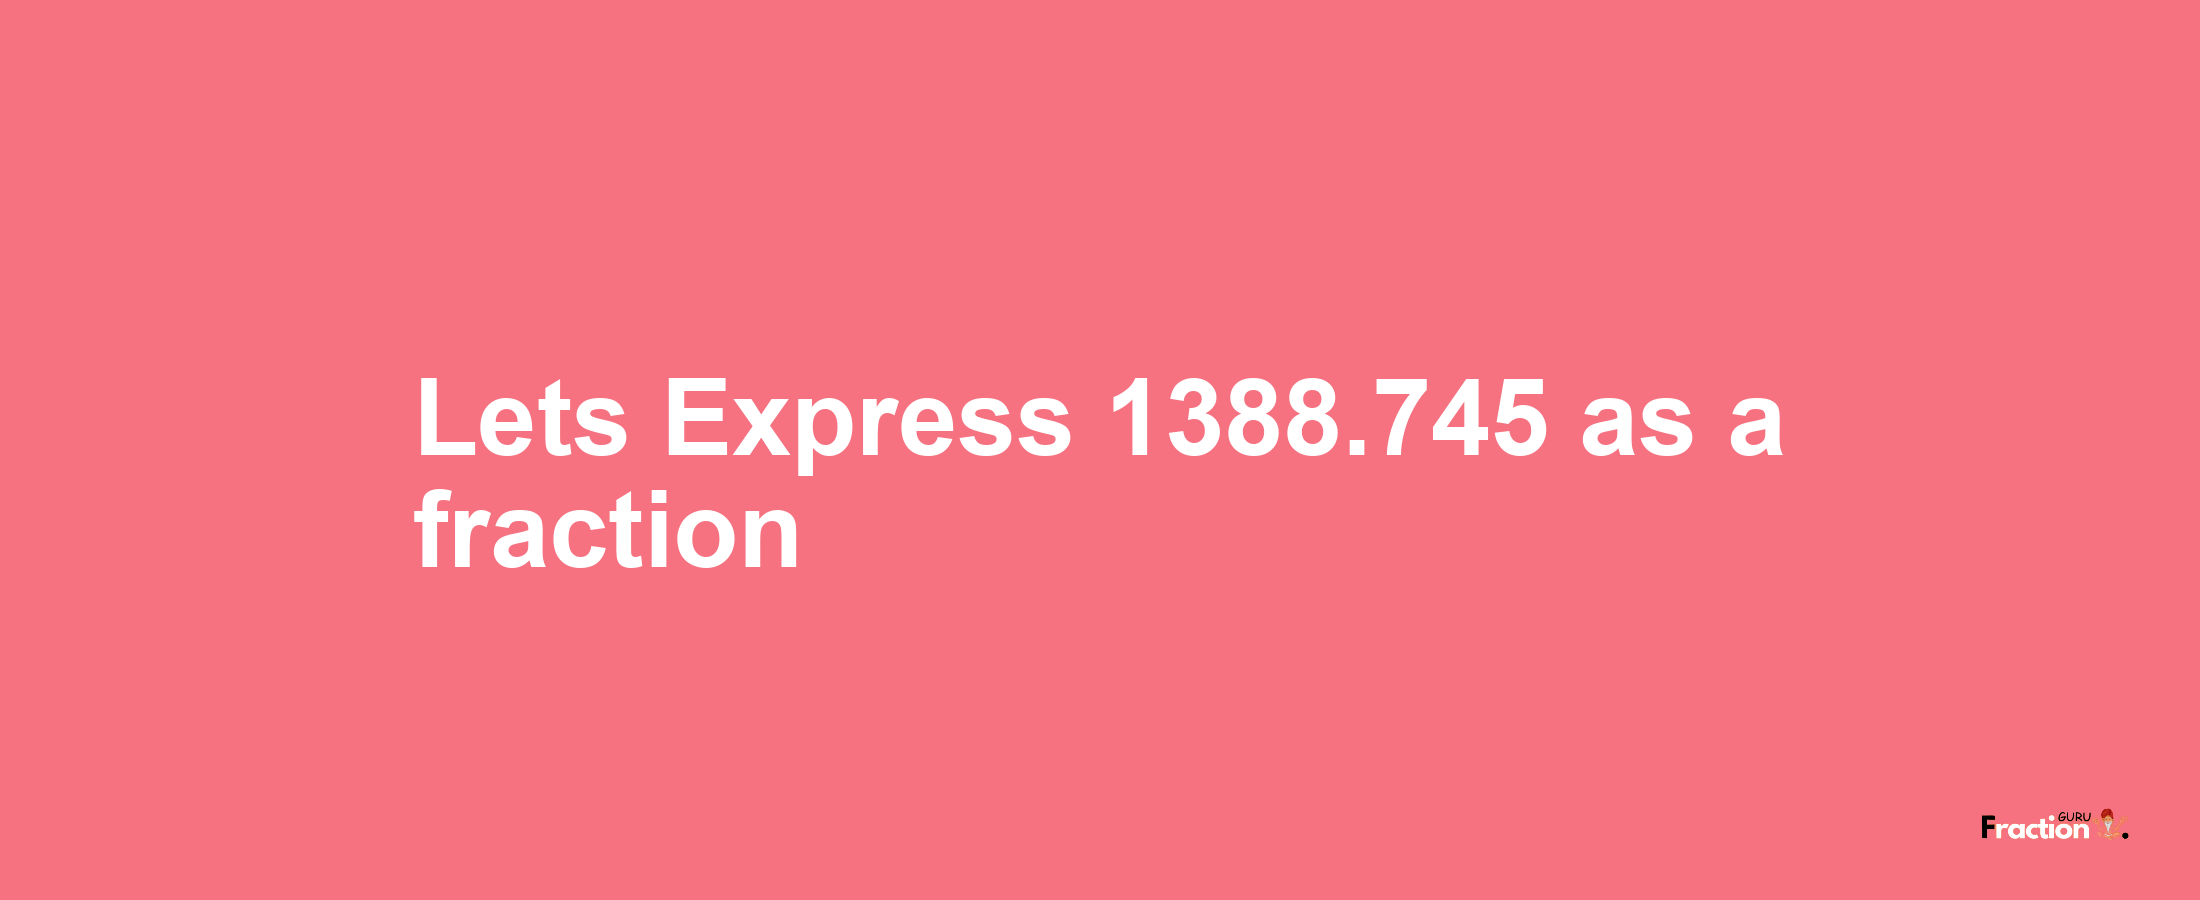 Lets Express 1388.745 as afraction